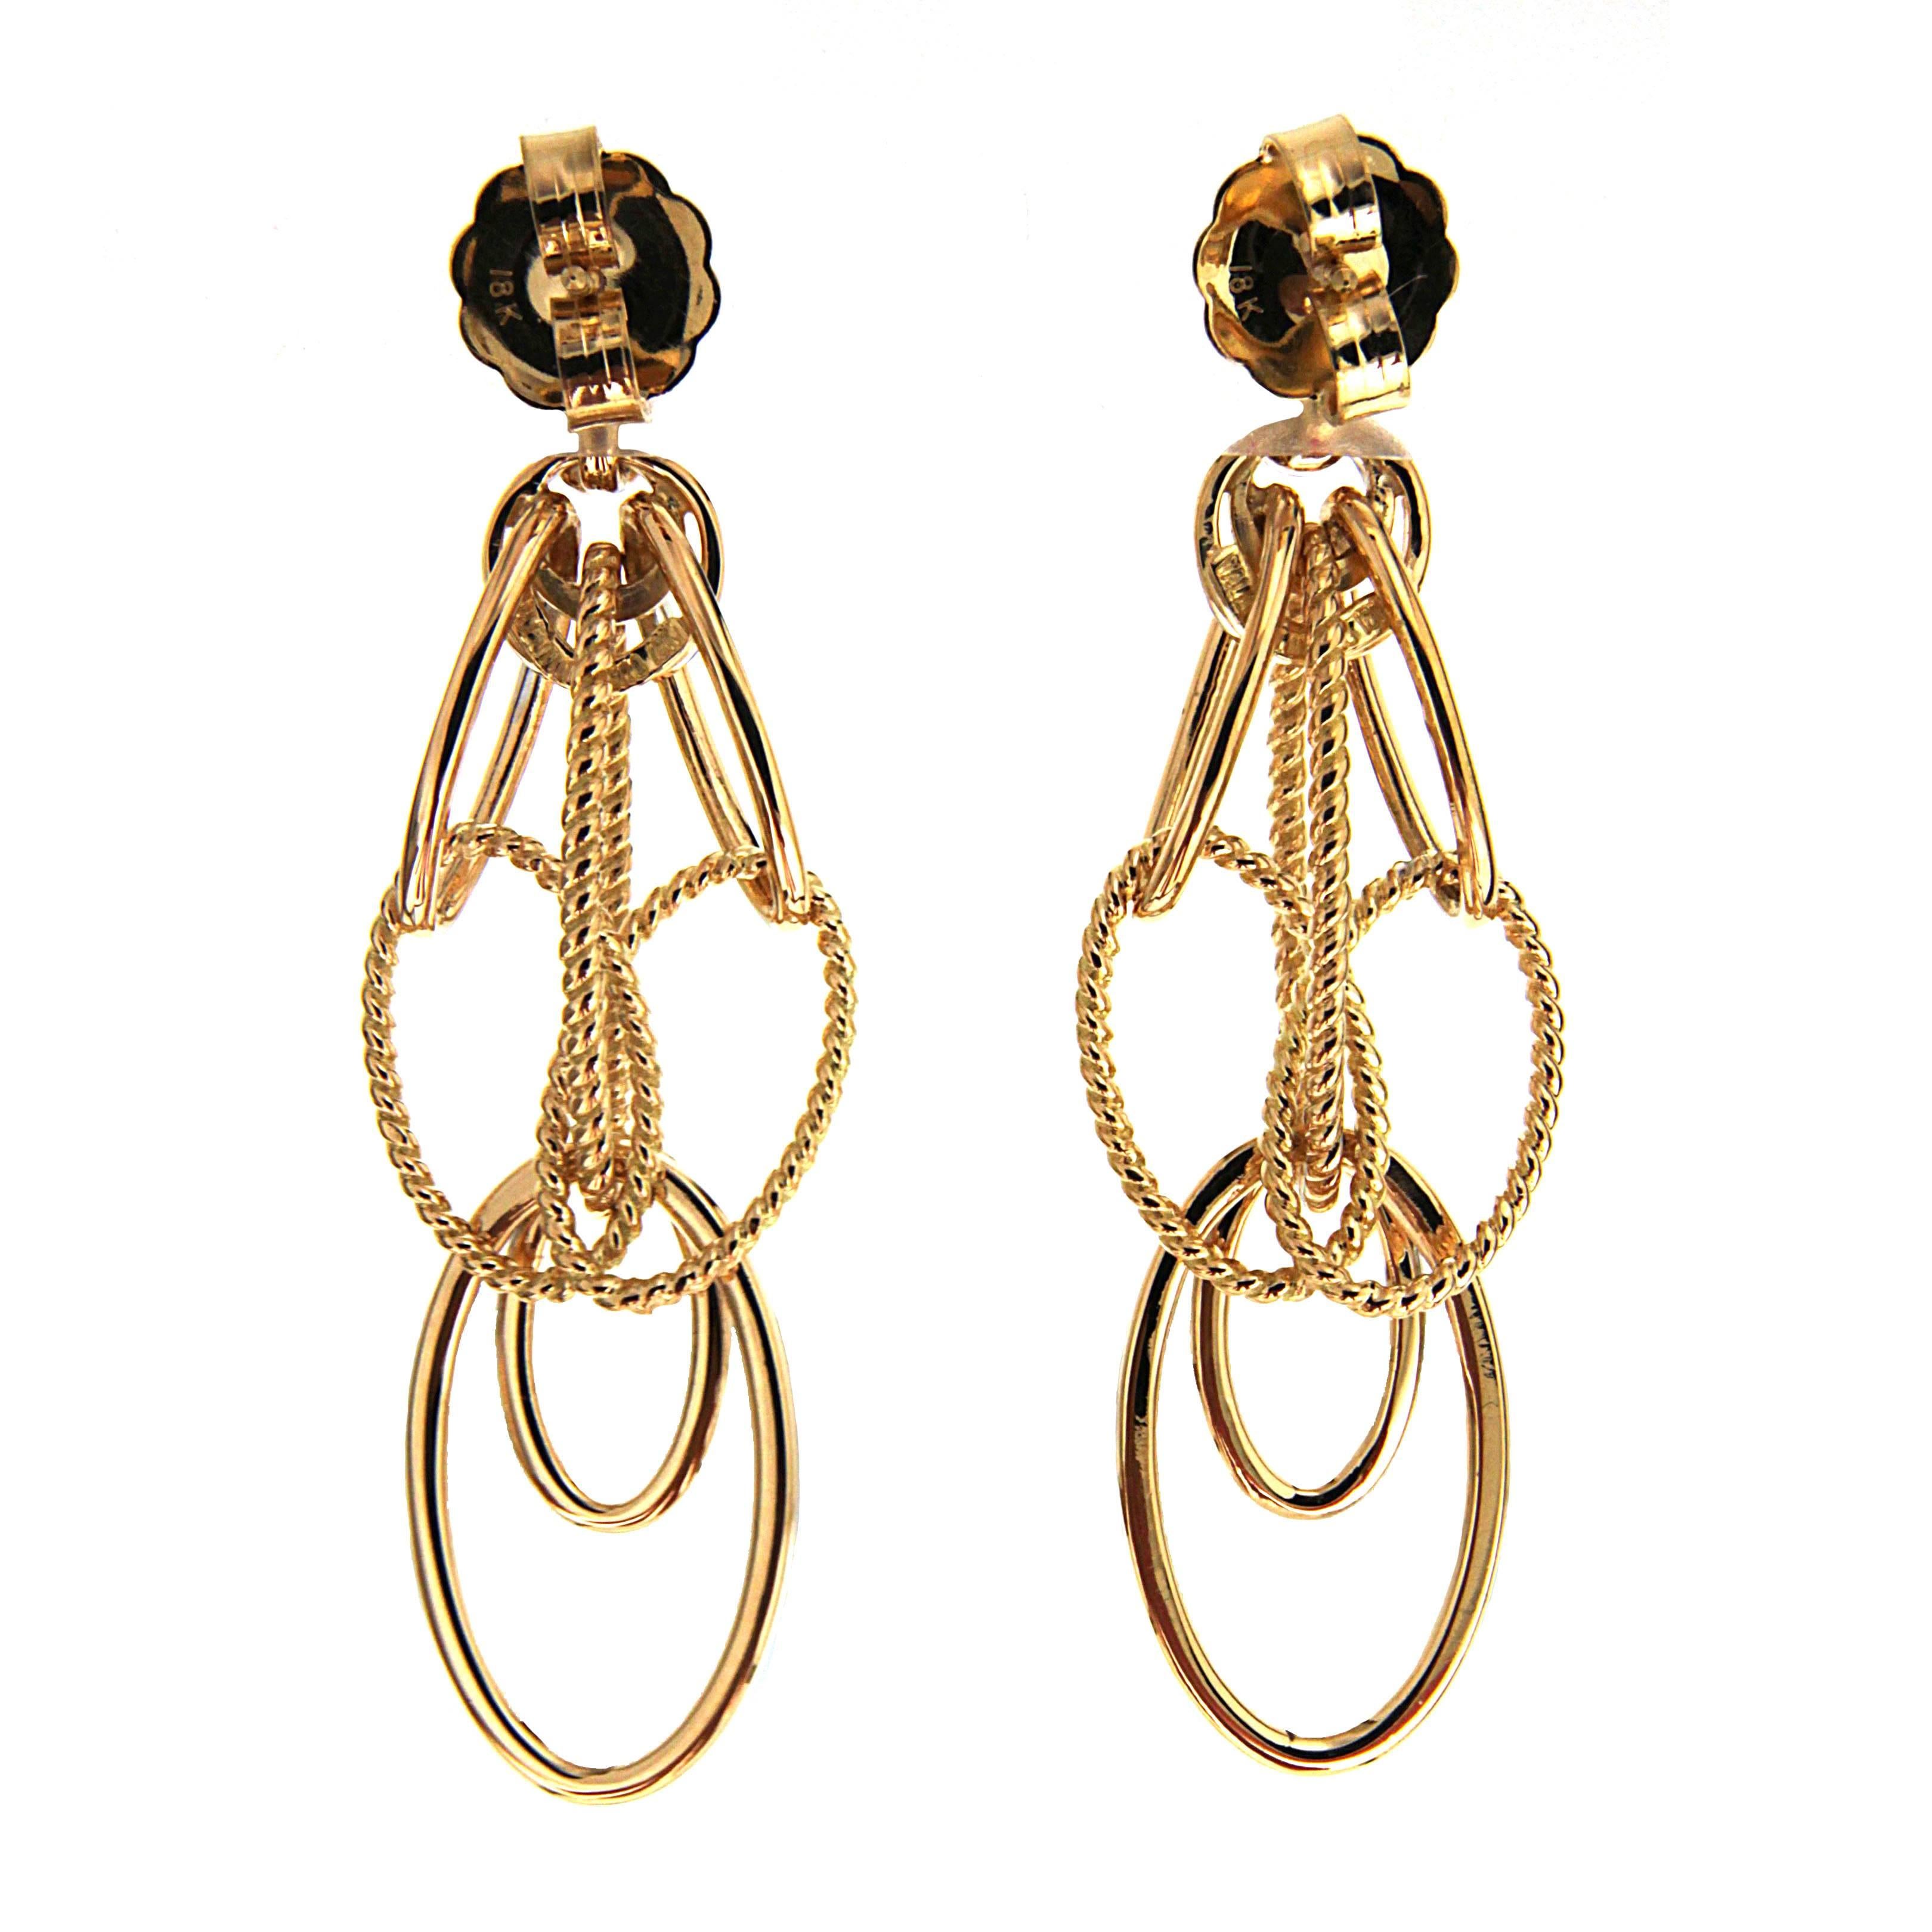 This unique pair of Cascading Oval Twisted and Plain Wire Earrings is designed with diamonds on the hoops, double circles and lower large oval. The earrings are finished in 18kt yellow gold with posts. This is a smaller version.

Large version also